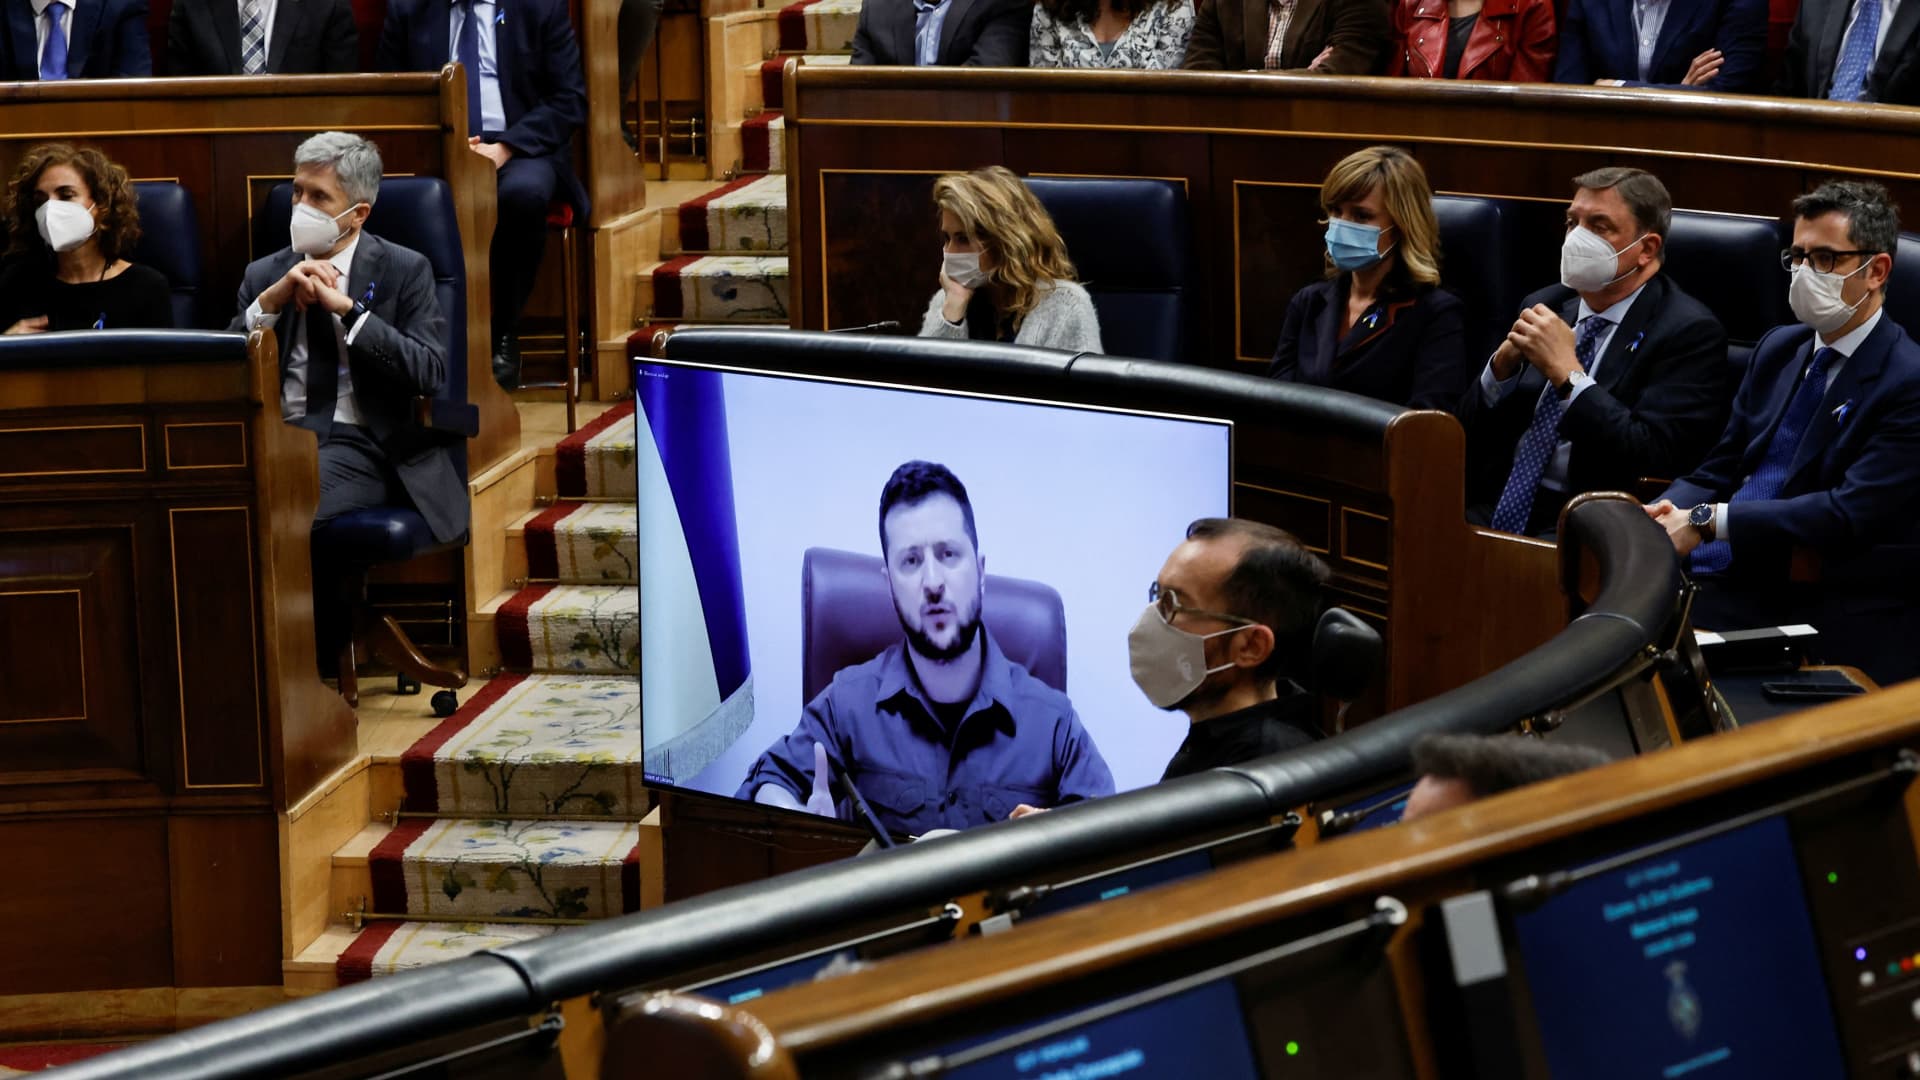 Ukrainian President Volodymyr Zelenskiy appears on a screen as he addresses members of Spanish parliament via video link, amid Russia's invasion of Ukraine, in Madrid, Spain, April 5, 2022.